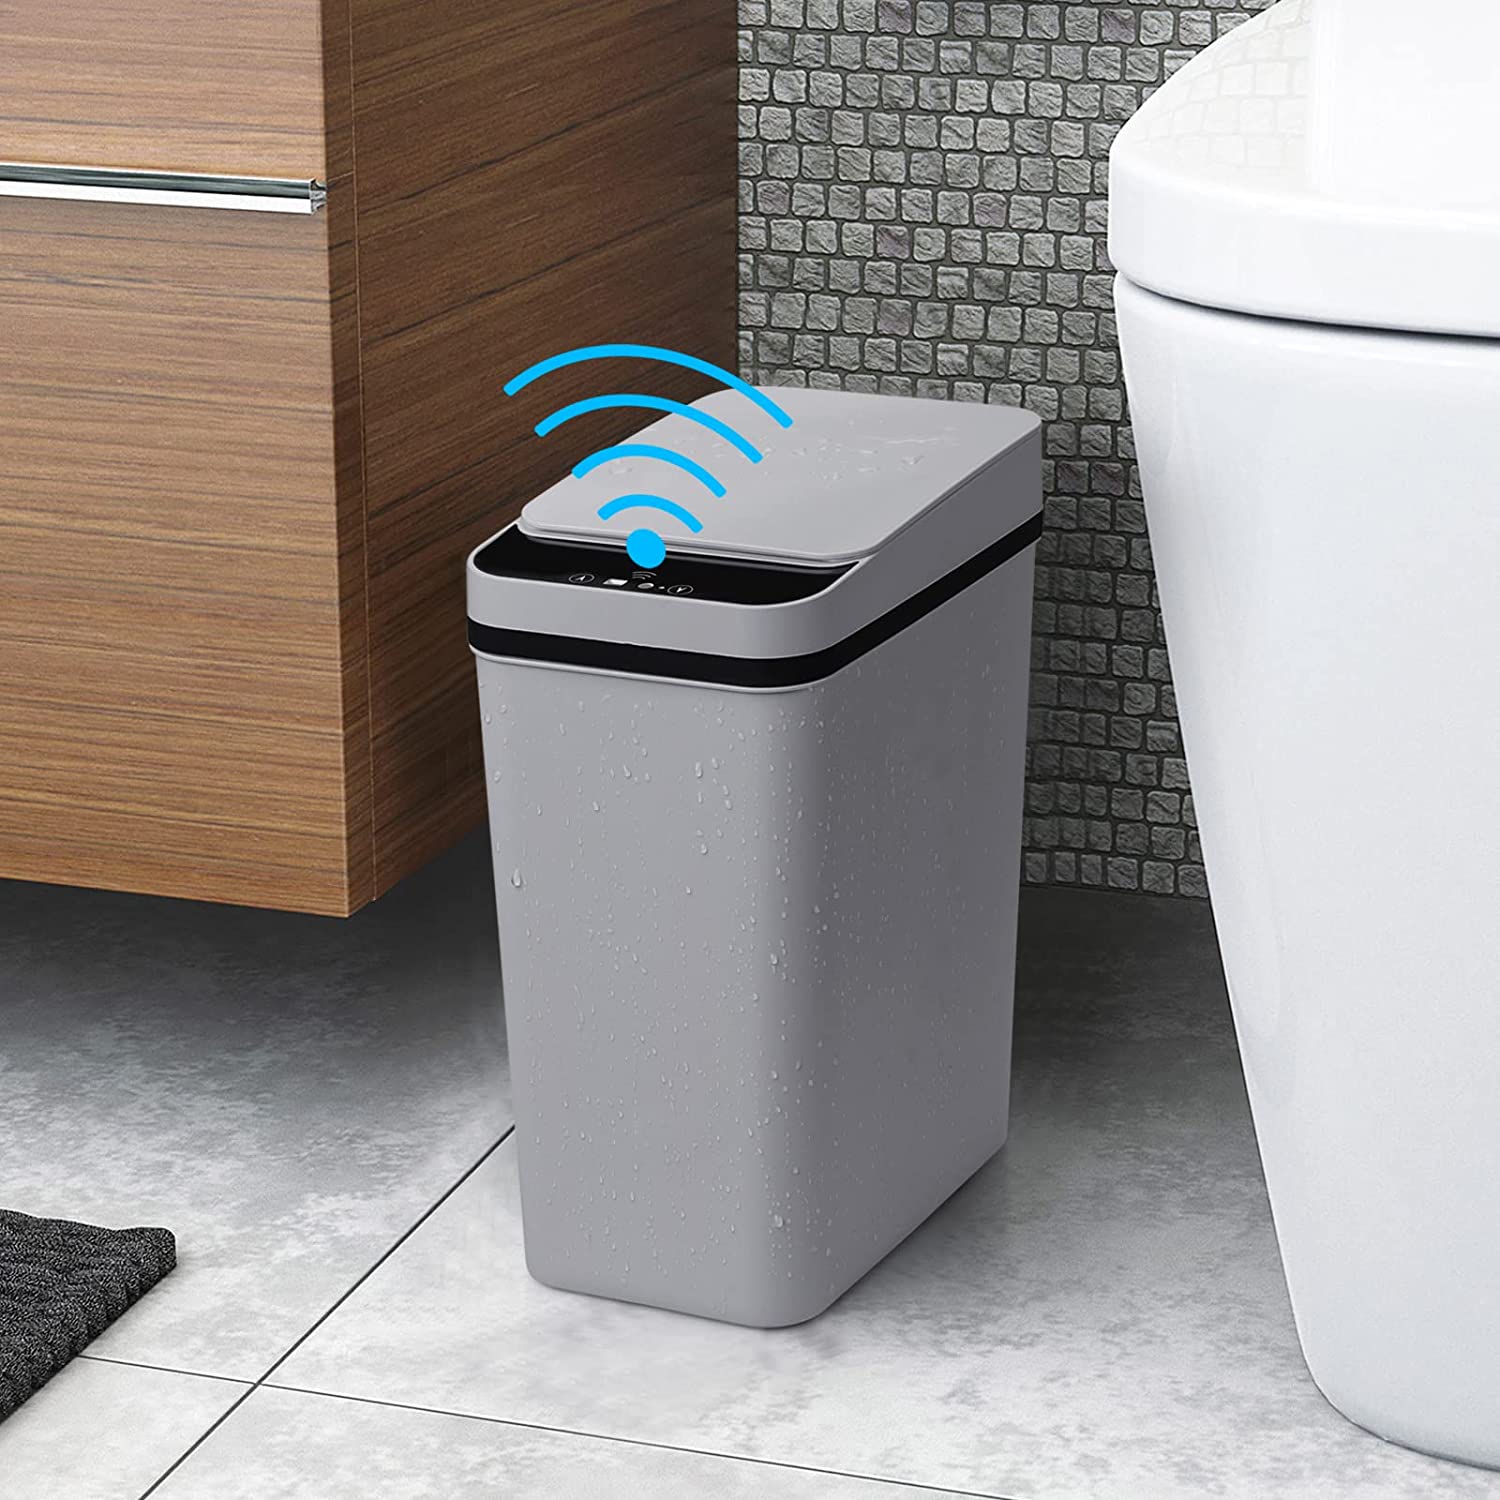 Anborry Smart Touchless Trash Can